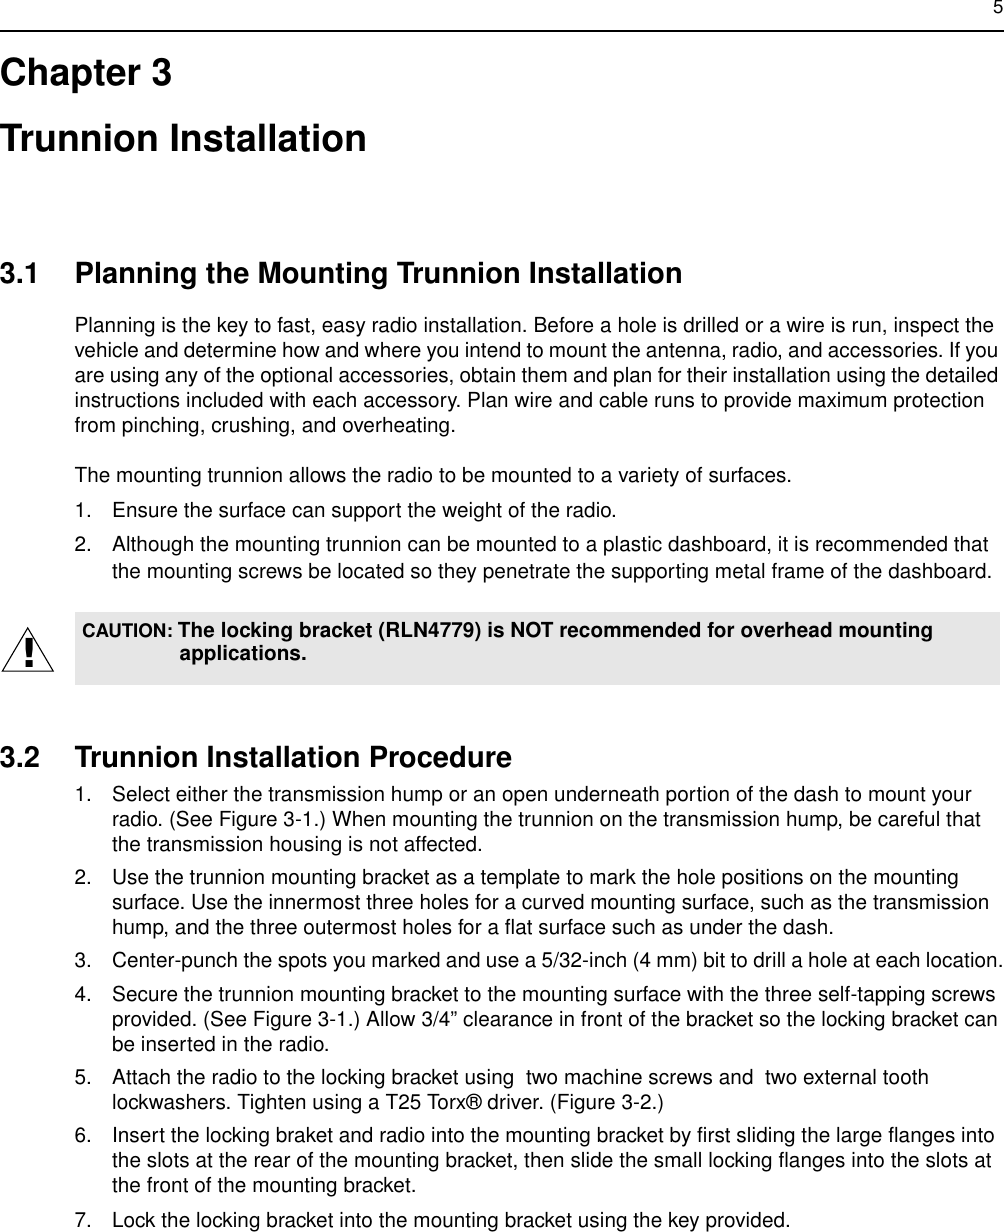 5Chapter 3Trunnion Installation3.1 Planning the Mounting Trunnion InstallationPlanning is the key to fast, easy radio installation. Before a hole is drilled or a wire is run, inspect the vehicle and determine how and where you intend to mount the antenna, radio, and accessories. If you are using any of the optional accessories, obtain them and plan for their installation using the detailed instructions included with each accessory. Plan wire and cable runs to provide maximum protection from pinching, crushing, and overheating.The mounting trunnion allows the radio to be mounted to a variety of surfaces.1. Ensure the surface can support the weight of the radio.2. Although the mounting trunnion can be mounted to a plastic dashboard, it is recommended that the mounting screws be located so they penetrate the supporting metal frame of the dashboard.3.2 Trunnion Installation Procedure1. Select either the transmission hump or an open underneath portion of the dash to mount your radio. (See Figure 3-1.) When mounting the trunnion on the transmission hump, be careful that the transmission housing is not affected.2. Use the trunnion mounting bracket as a template to mark the hole positions on the mounting surface. Use the innermost three holes for a curved mounting surface, such as the transmission hump, and the three outermost holes for a flat surface such as under the dash.3. Center-punch the spots you marked and use a 5/32-inch (4 mm) bit to drill a hole at each location.4. Secure the trunnion mounting bracket to the mounting surface with the three self-tapping screws provided. (See Figure 3-1.) Allow 3/4” clearance in front of the bracket so the locking bracket can be inserted in the radio.5. Attach the radio to the locking bracket using  two machine screws and  two external tooth lockwashers. Tighten using a T25 Torx® driver. (Figure 3-2.)6. Insert the locking braket and radio into the mounting bracket by first sliding the large flanges into the slots at the rear of the mounting bracket, then slide the small locking flanges into the slots at the front of the mounting bracket.7. Lock the locking bracket into the mounting bracket using the key provided.CAUTION: The locking bracket (RLN4779) is NOT recommended for overhead mounting applications.!